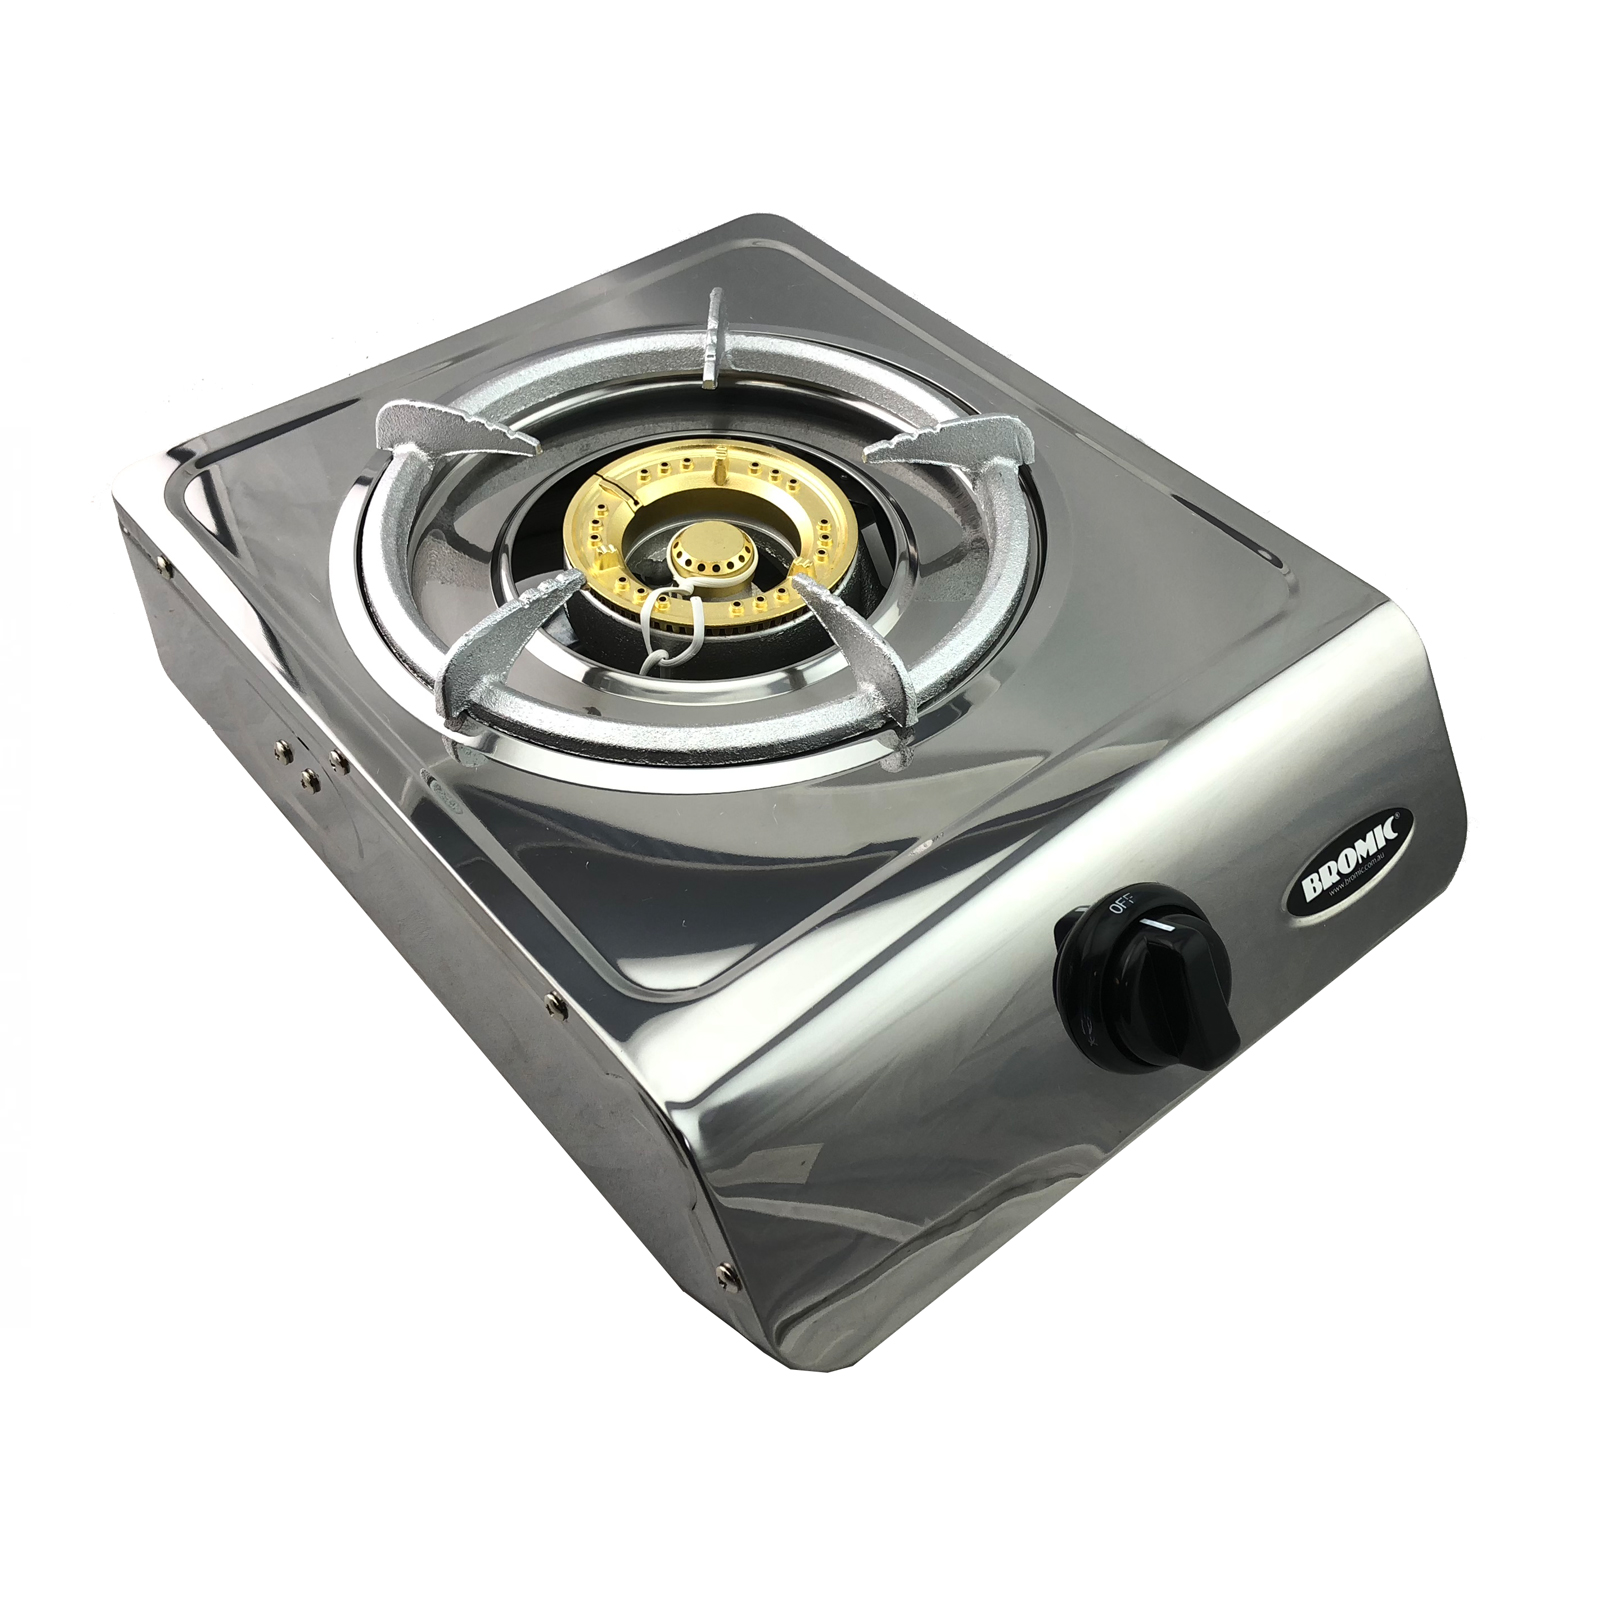 Creatice Single Burner Electric Stove for Large Space